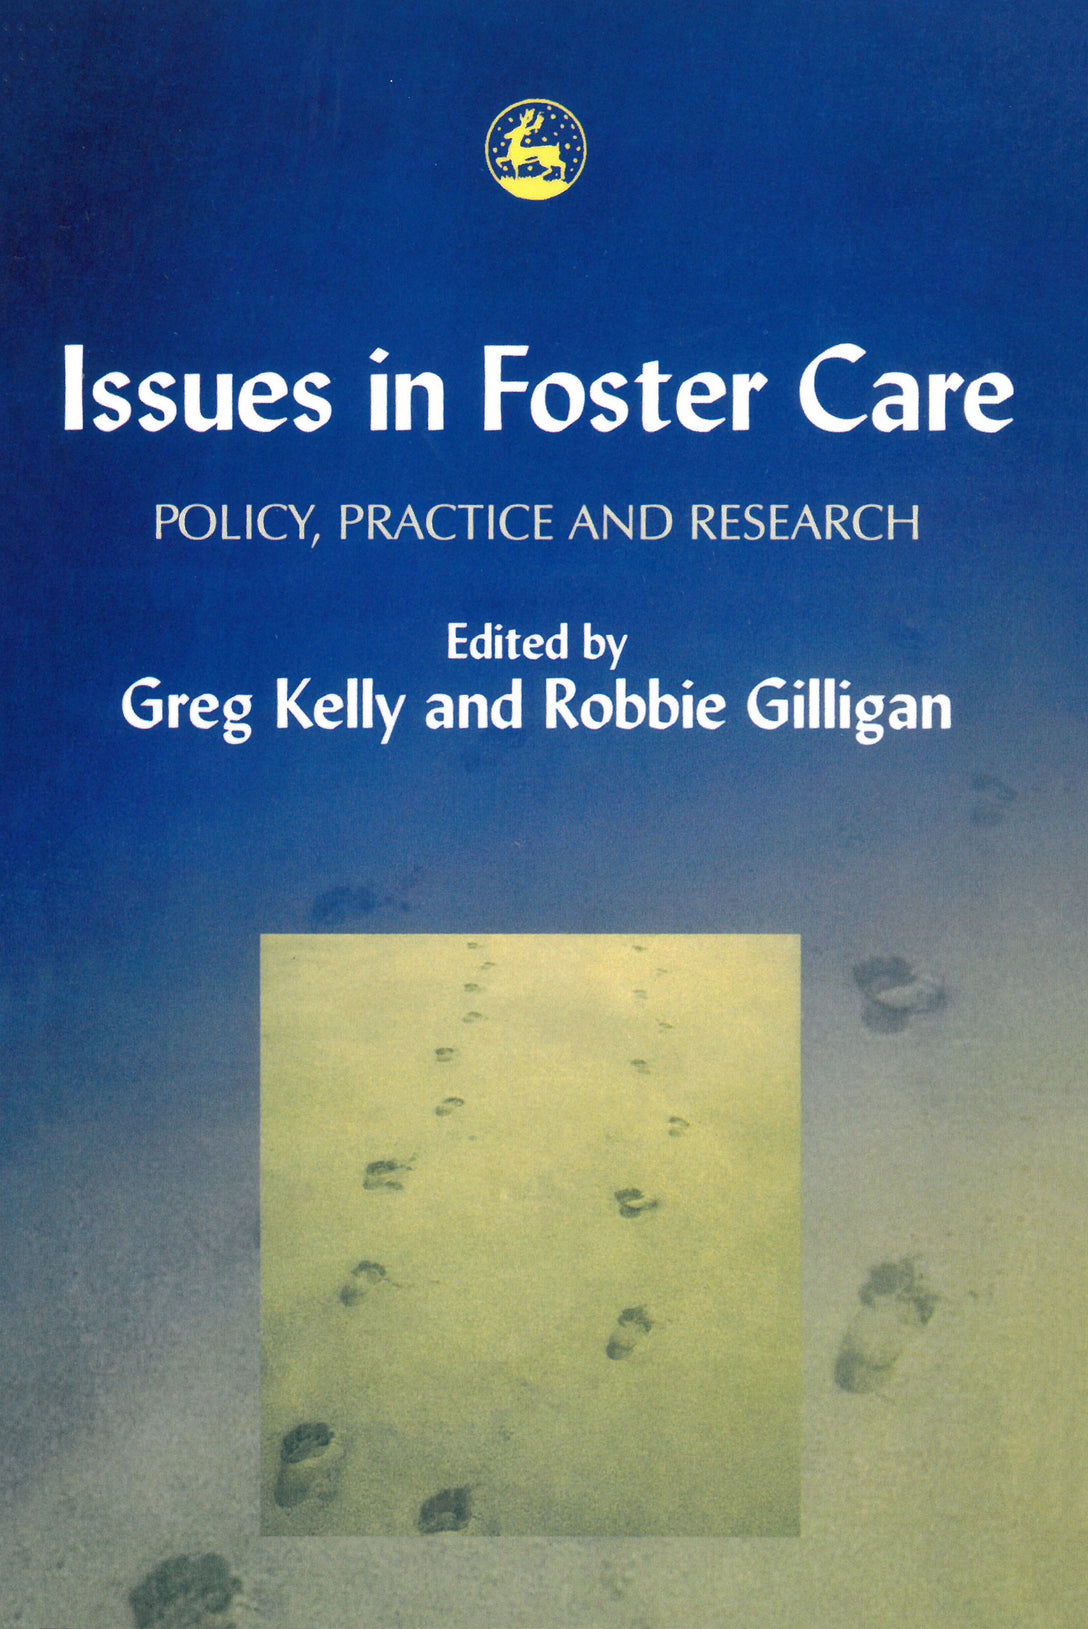 Issues in Foster Care by Robbie Gilligan, Greg Kelly